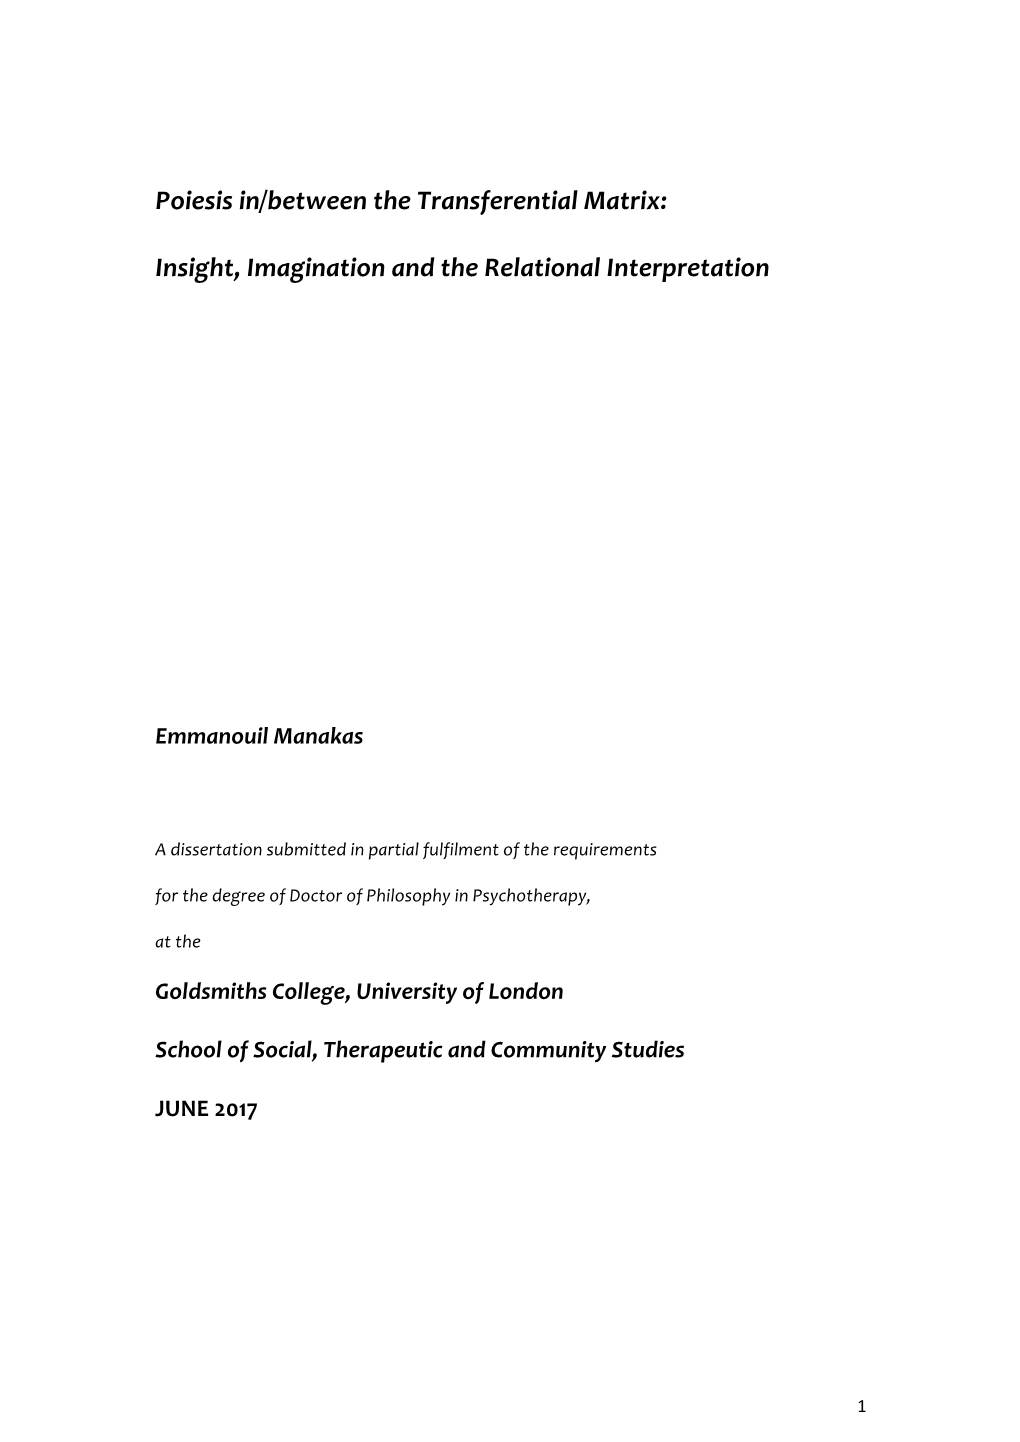 Poiesis In/Between the Transferential Matrix: Insight, Imagination and The